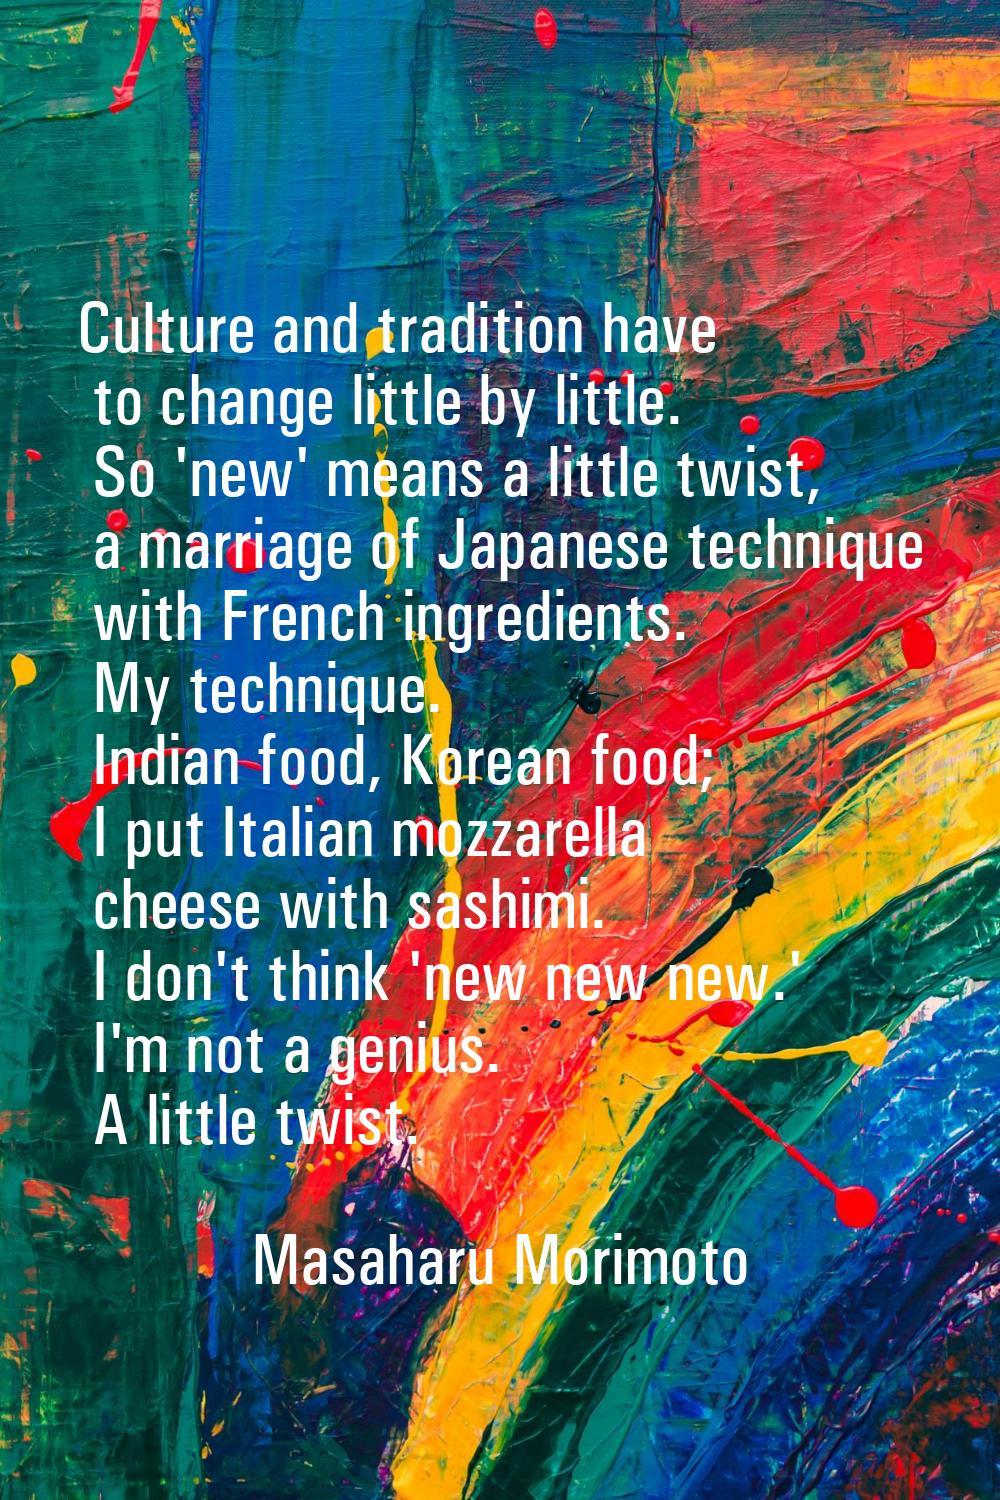 Culture and tradition have to change little by little. So 'new' means a little twist, a marriage of